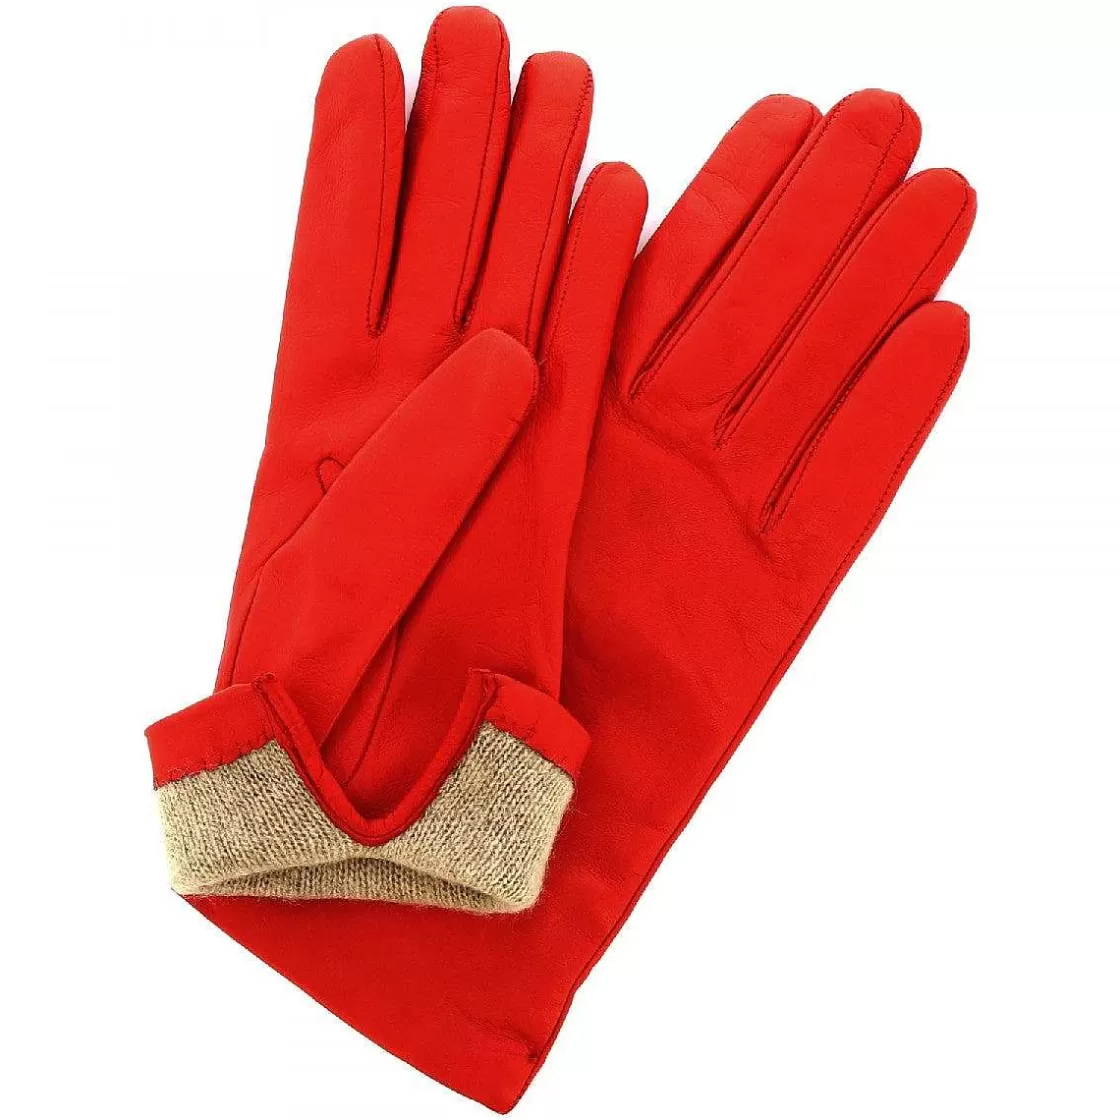 Leonardo Classic Women'S Gloves Handmade In Red Nappa Leather Lined In Cashmere Hot